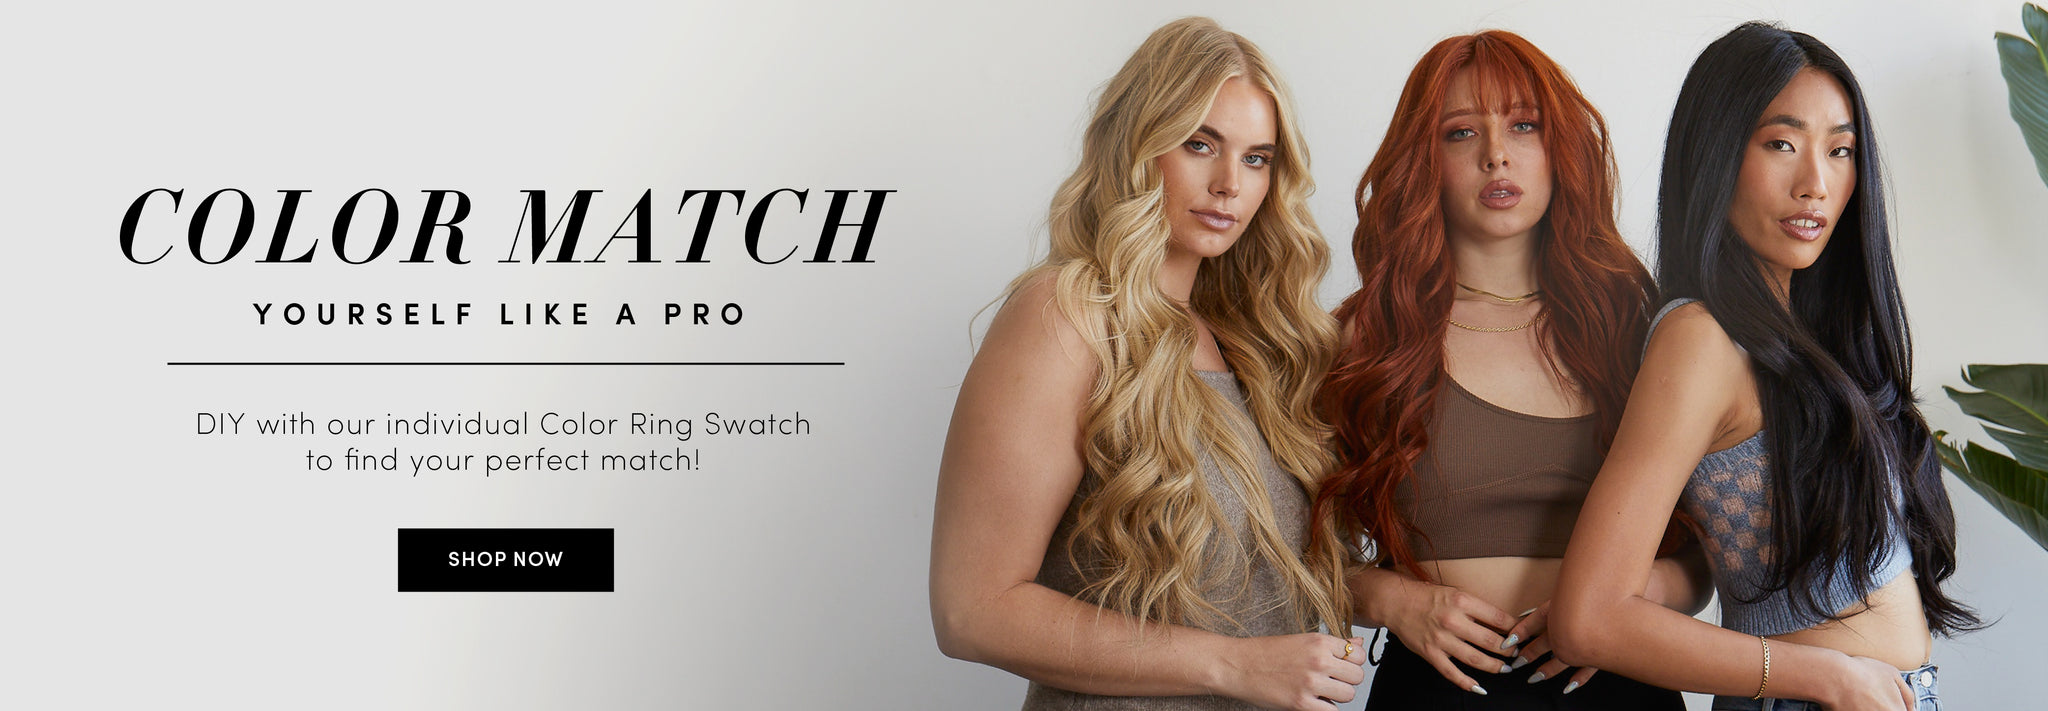 Blonde, Red, and Black hair models with text that reads "Color match yourself like a pro. DIY with out individual Color Ring Swatch to find your perfect match"